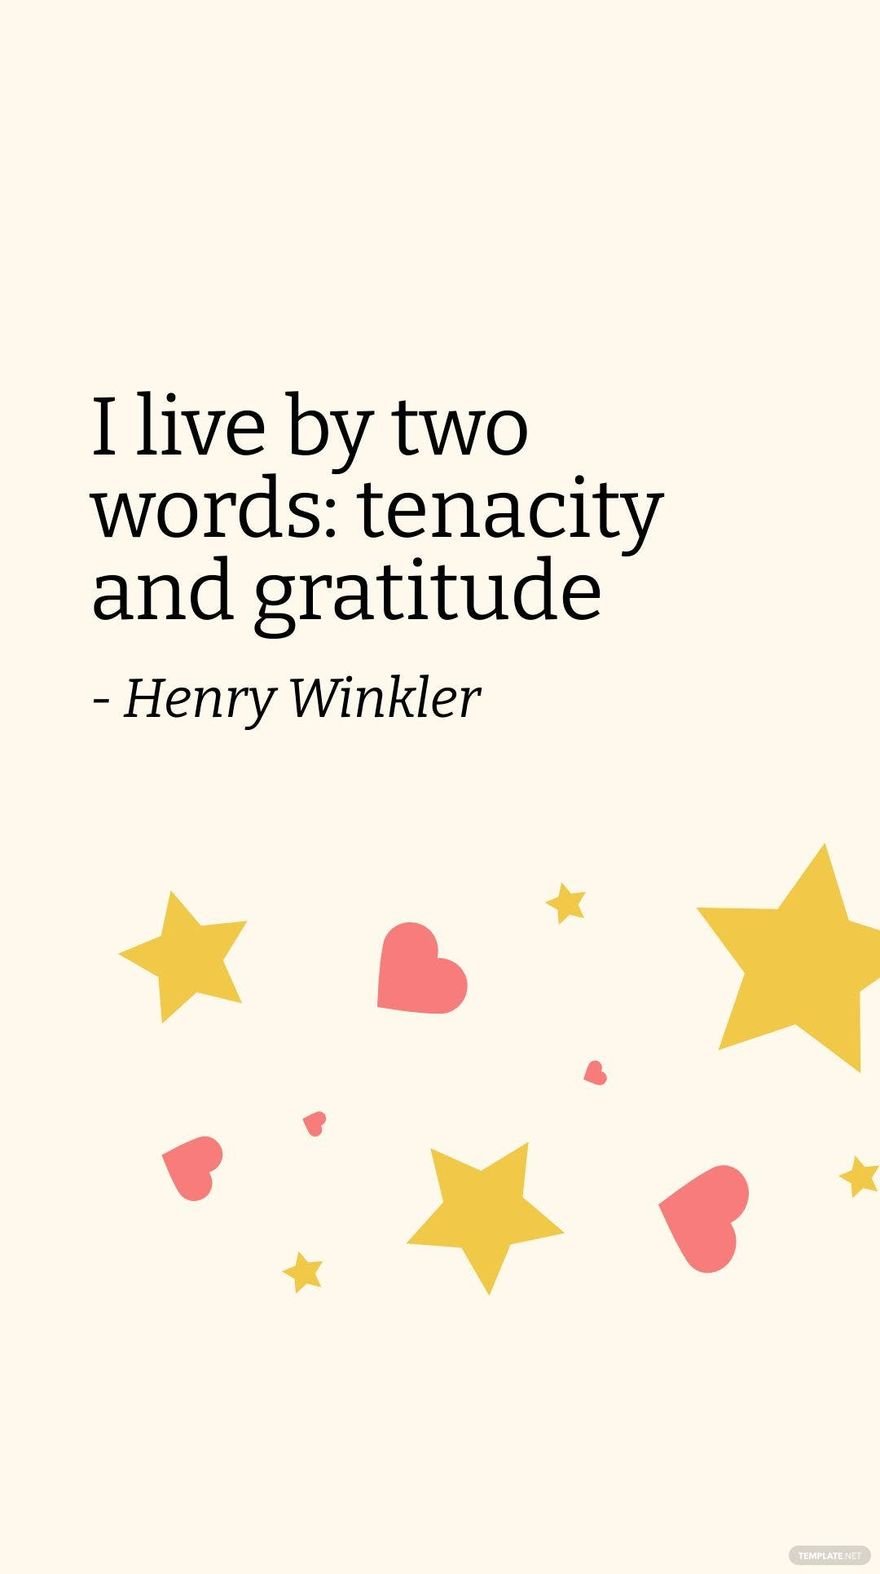 Free Henry Winkler - I live by two words: tenacity and gratitude in JPG